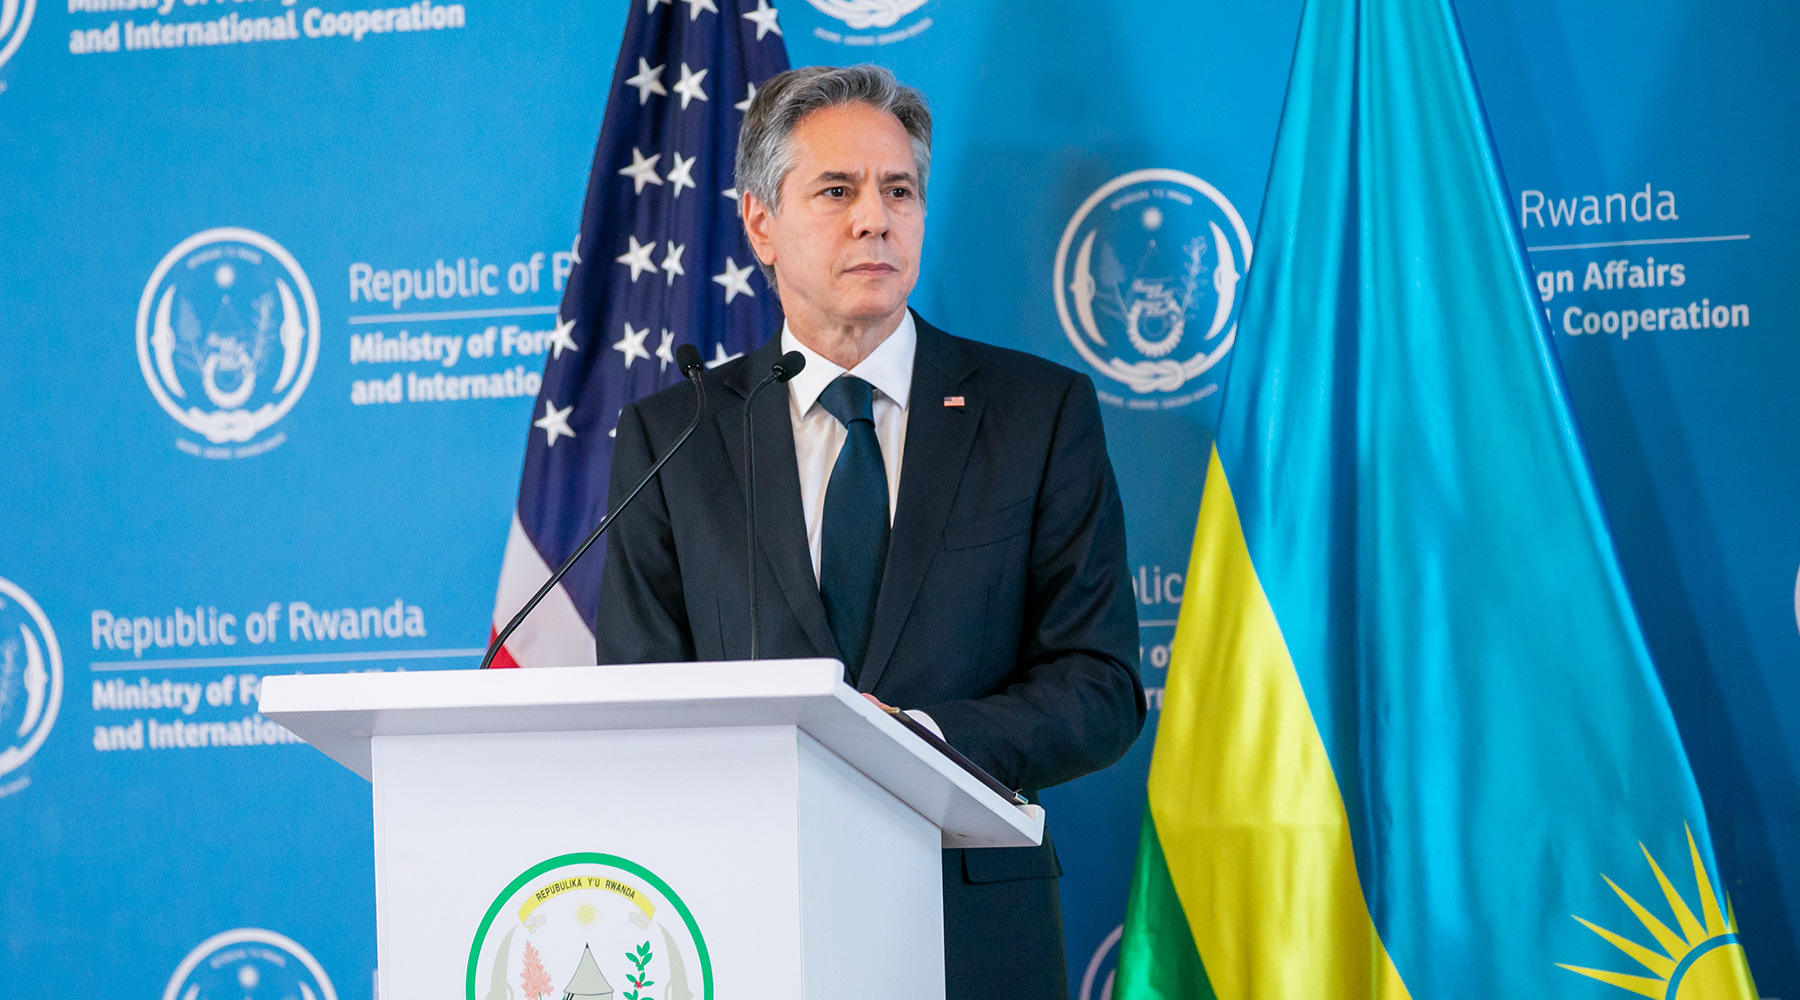 The US Secretary of State, Antony J. Blinken, during a joint news conference with Foreign Affairs Minister Dr Vincent Biruta in Kigali on August 11. 